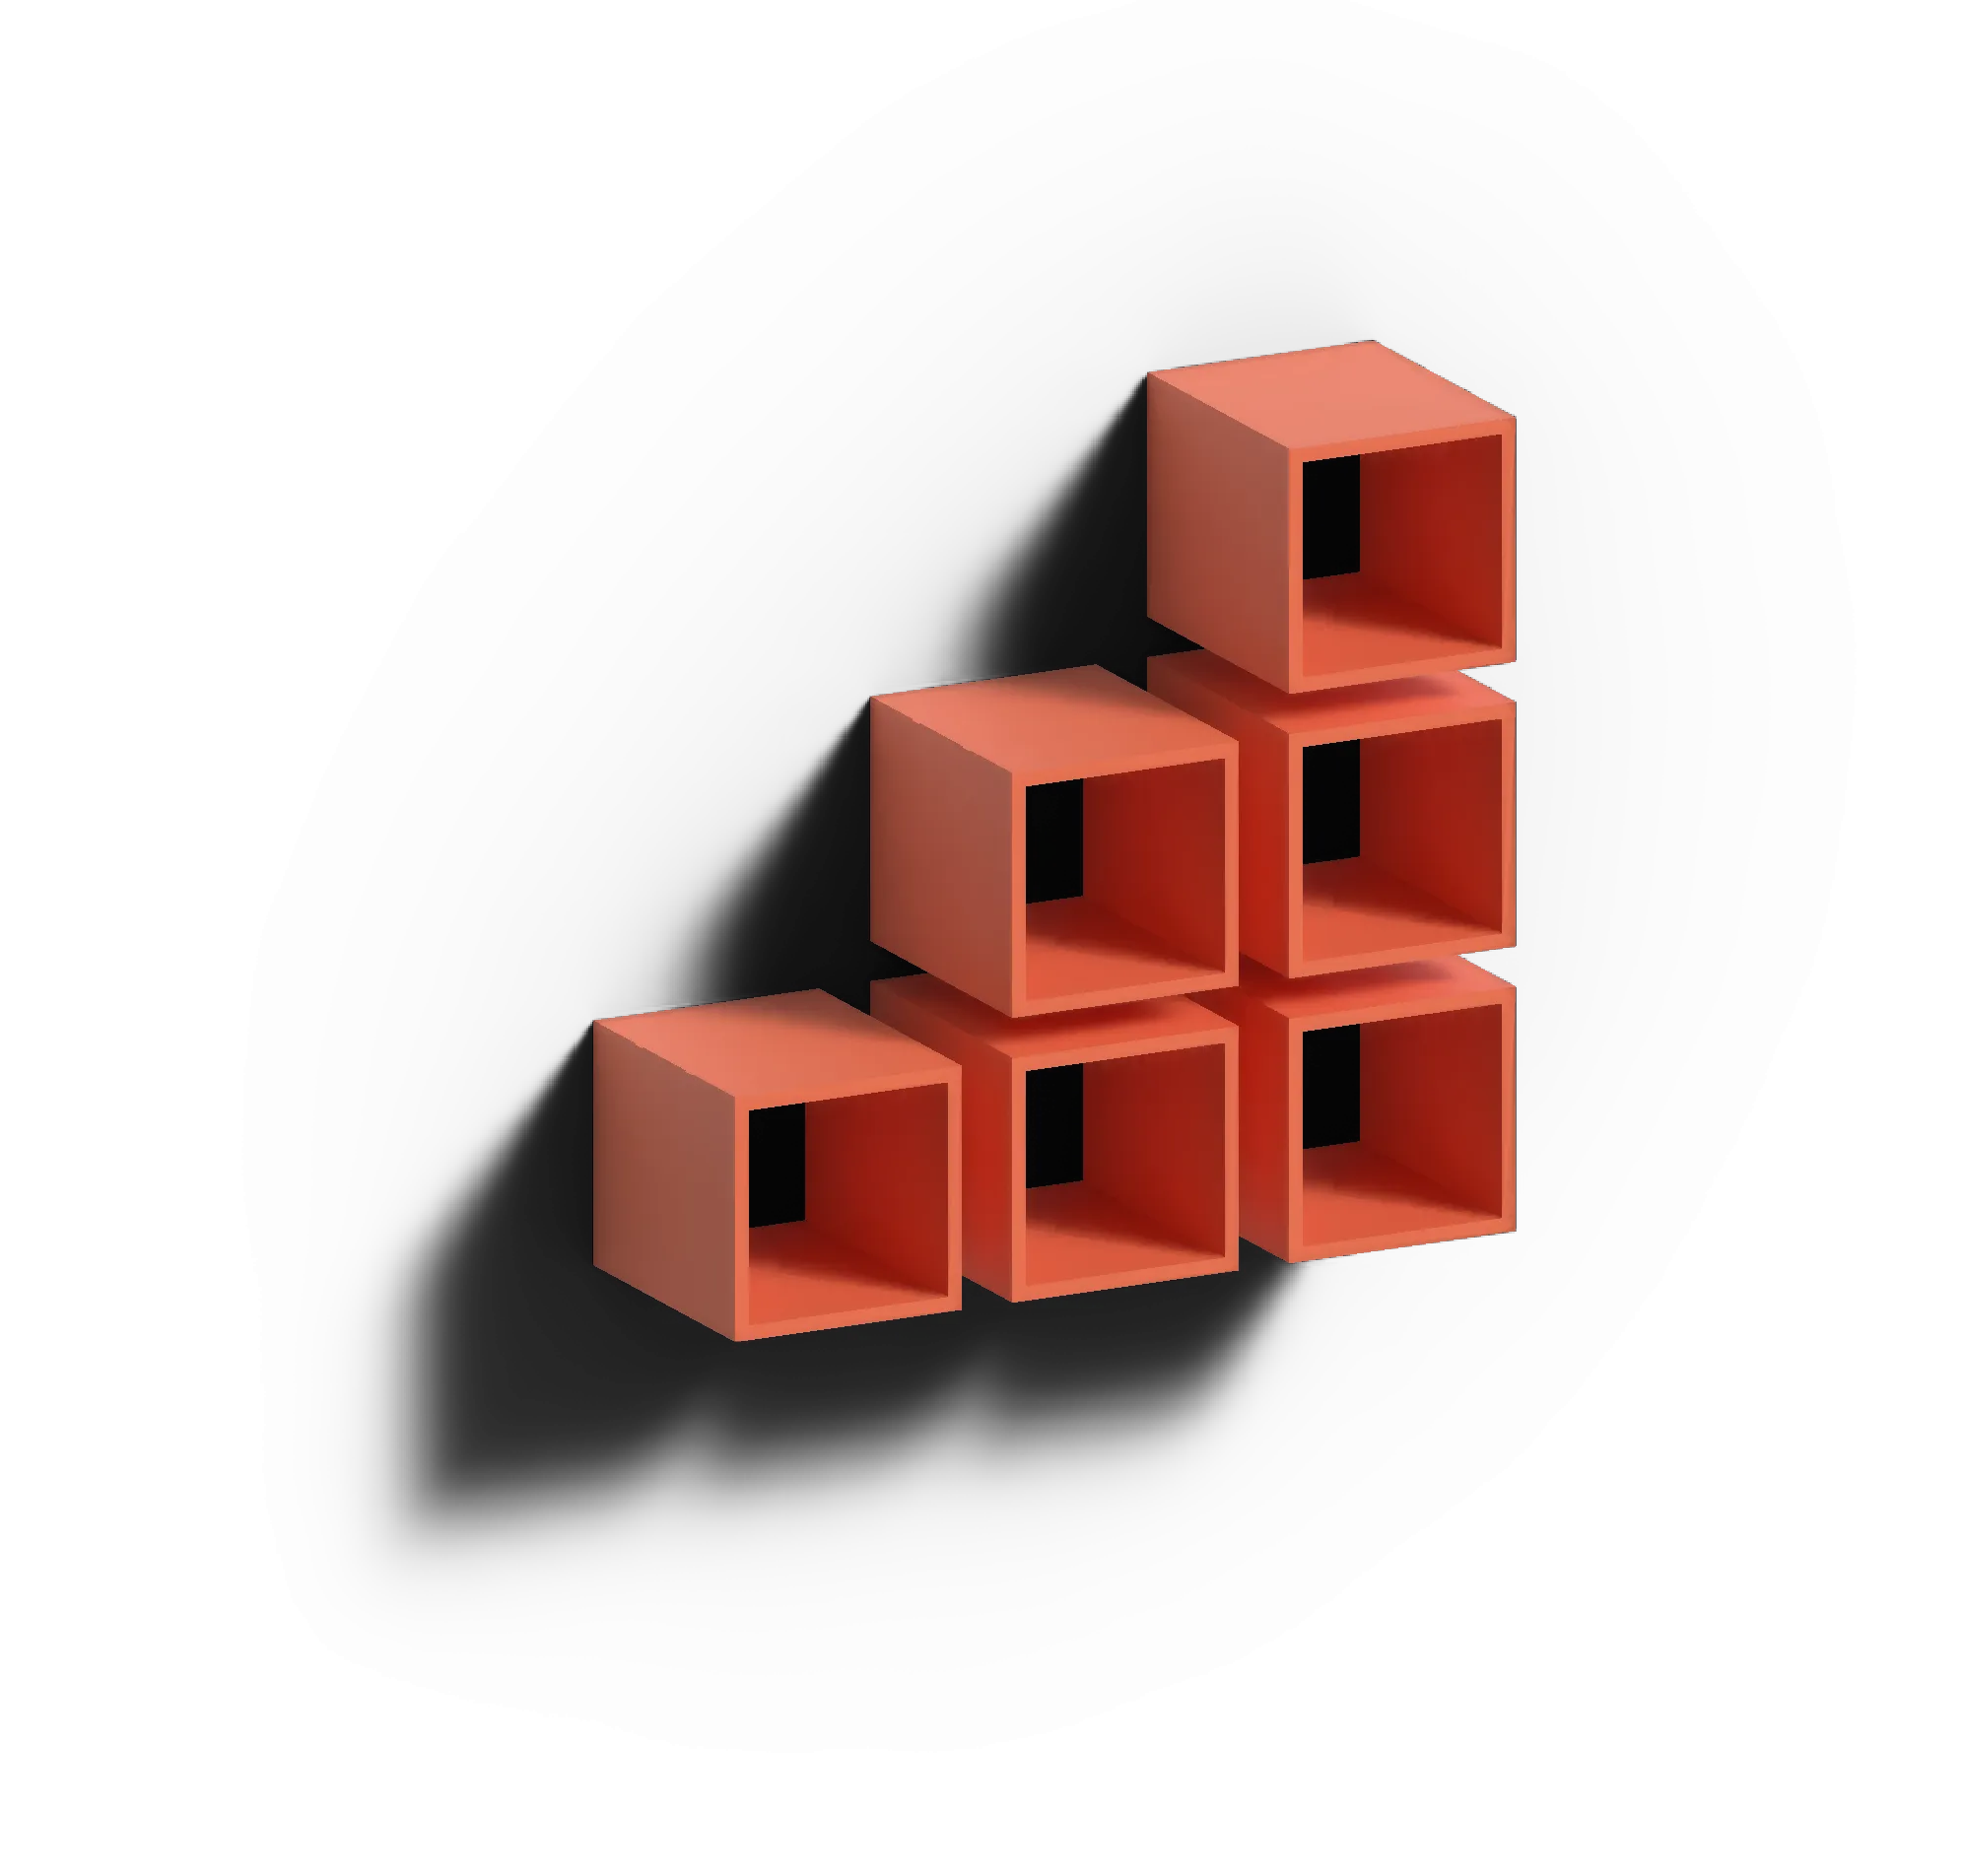 3D cubes in the shape of an ascending graph.